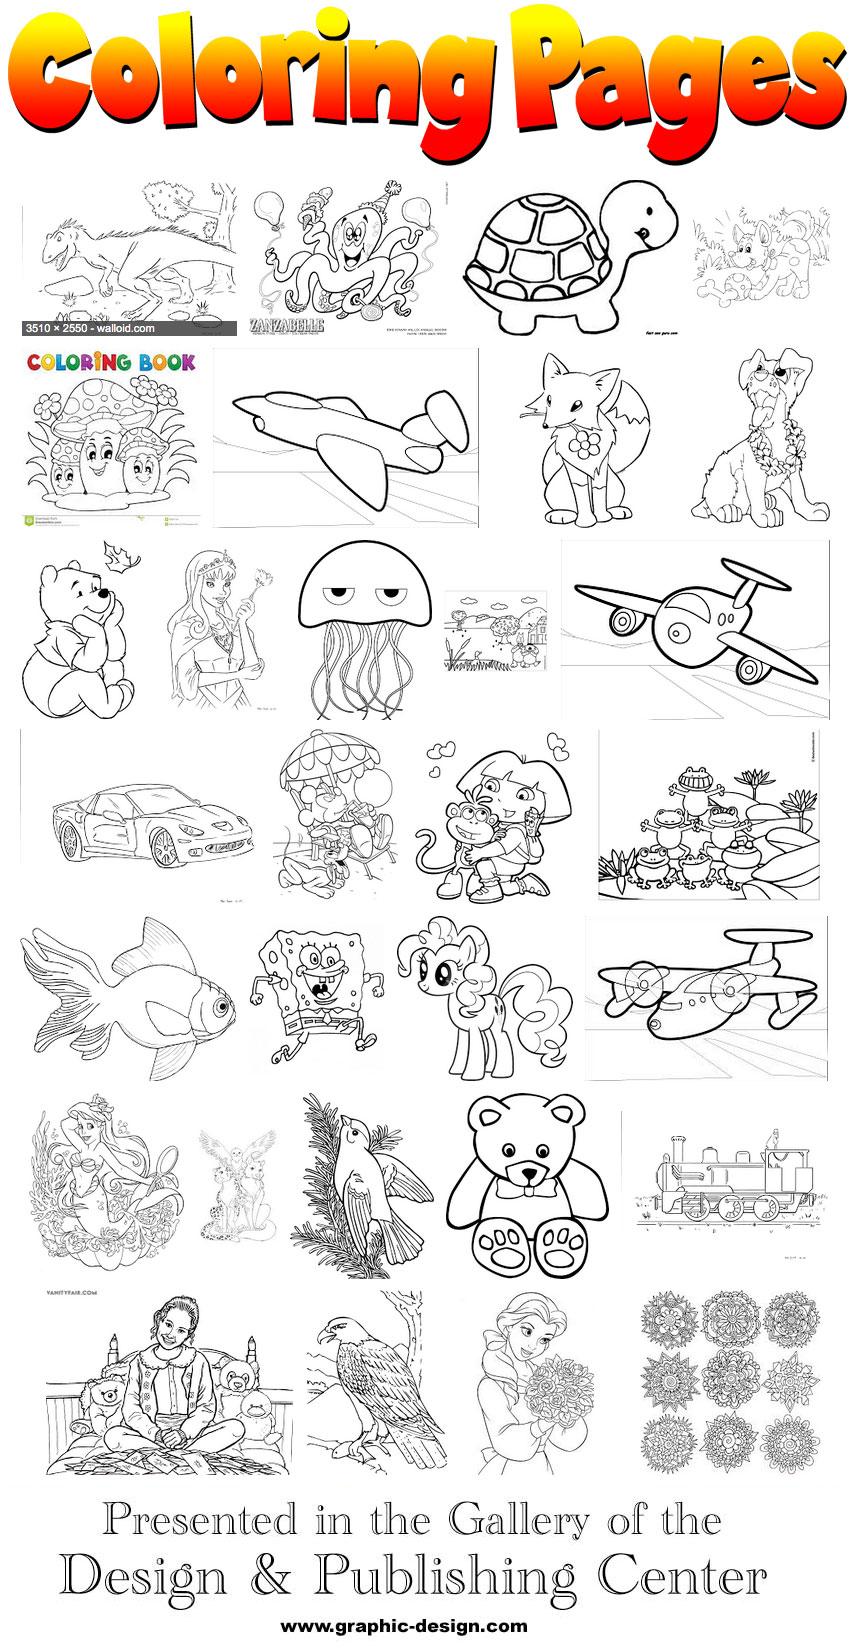 complimentary Coloring Poster